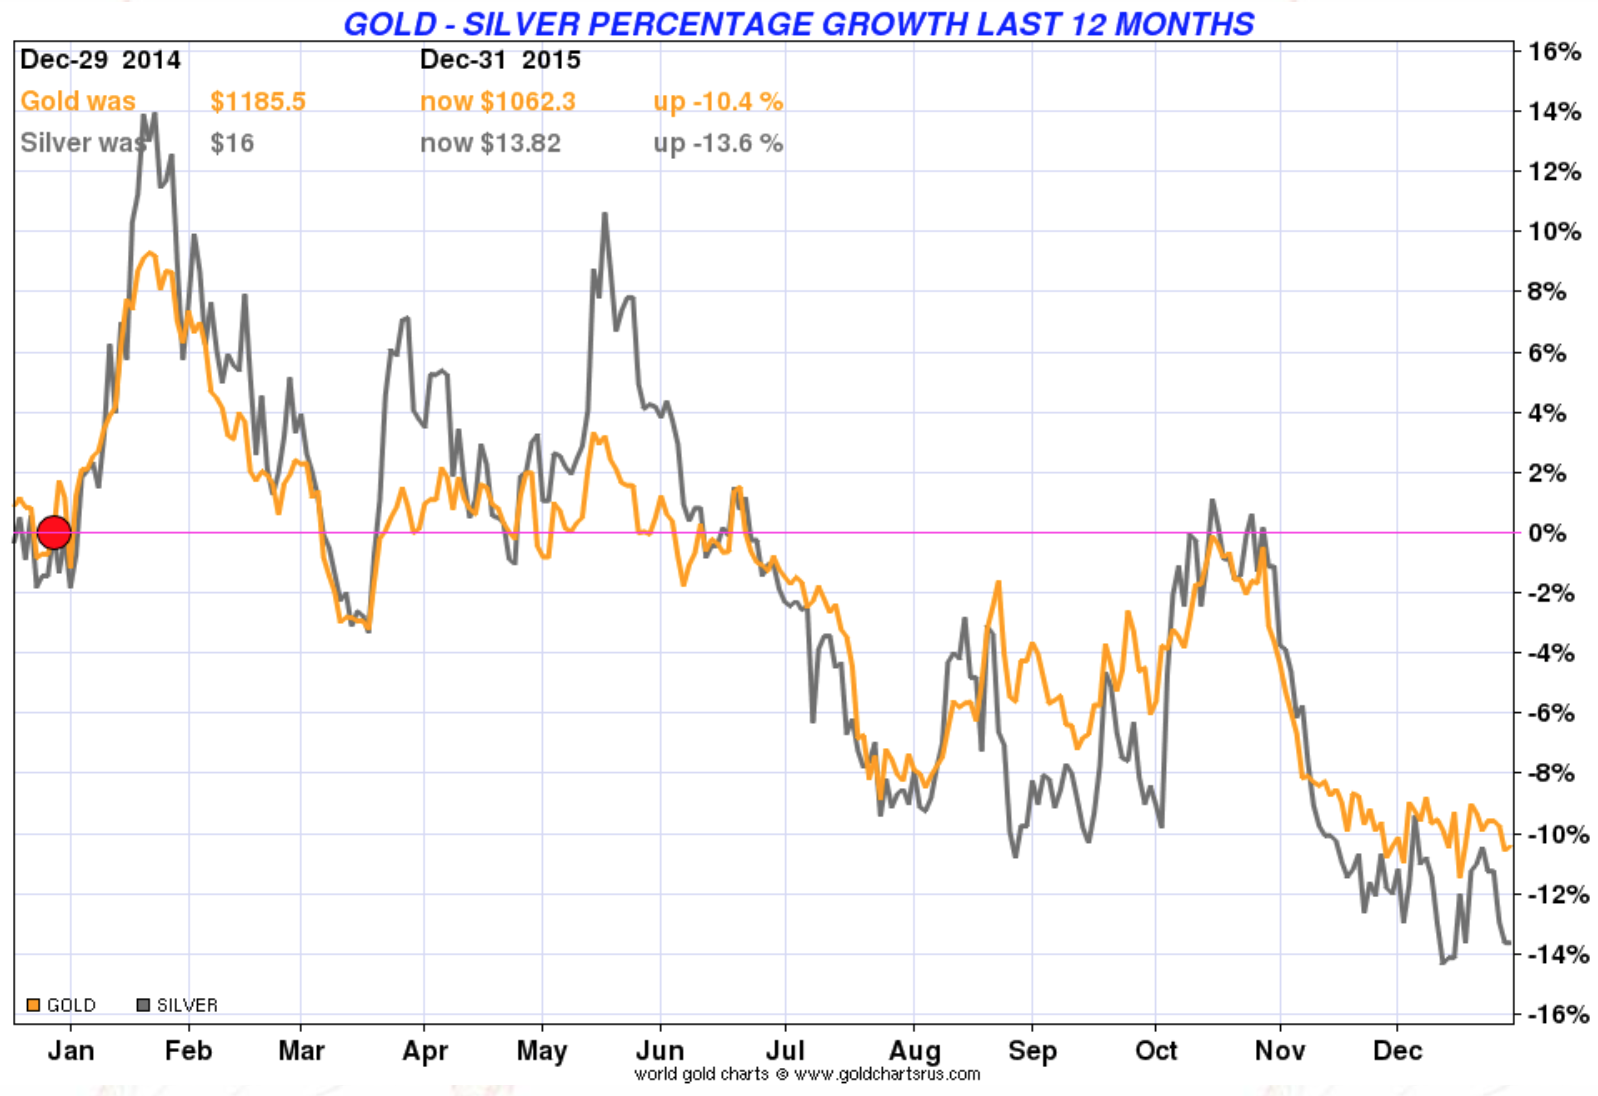 Gold - Silver percentage growth last 12 months